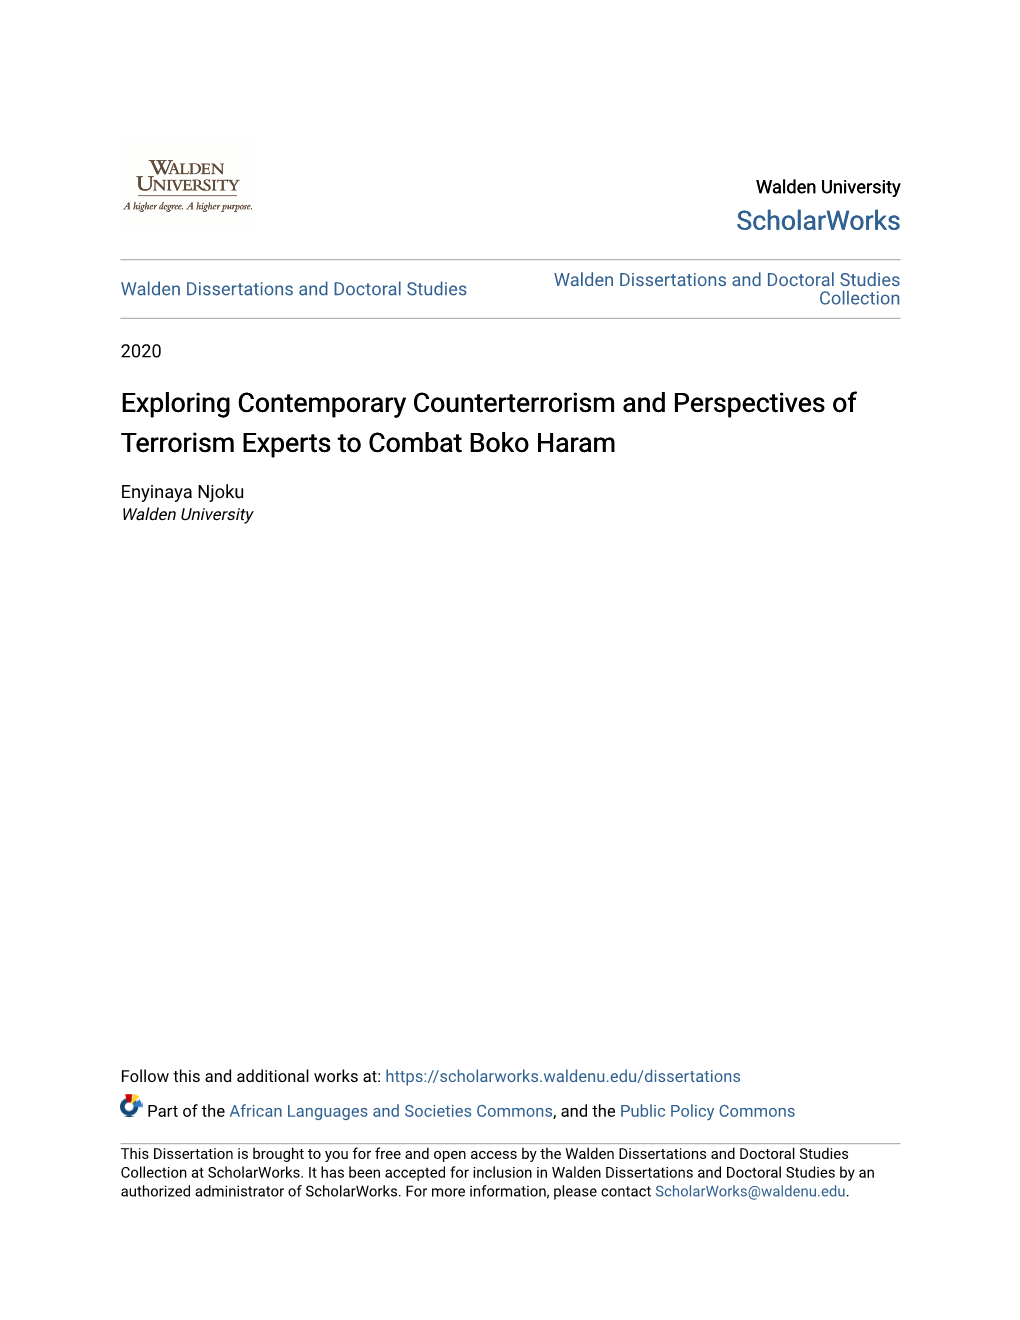 Exploring Contemporary Counterterrorism and Perspectives of Terrorism Experts to Combat Boko Haram